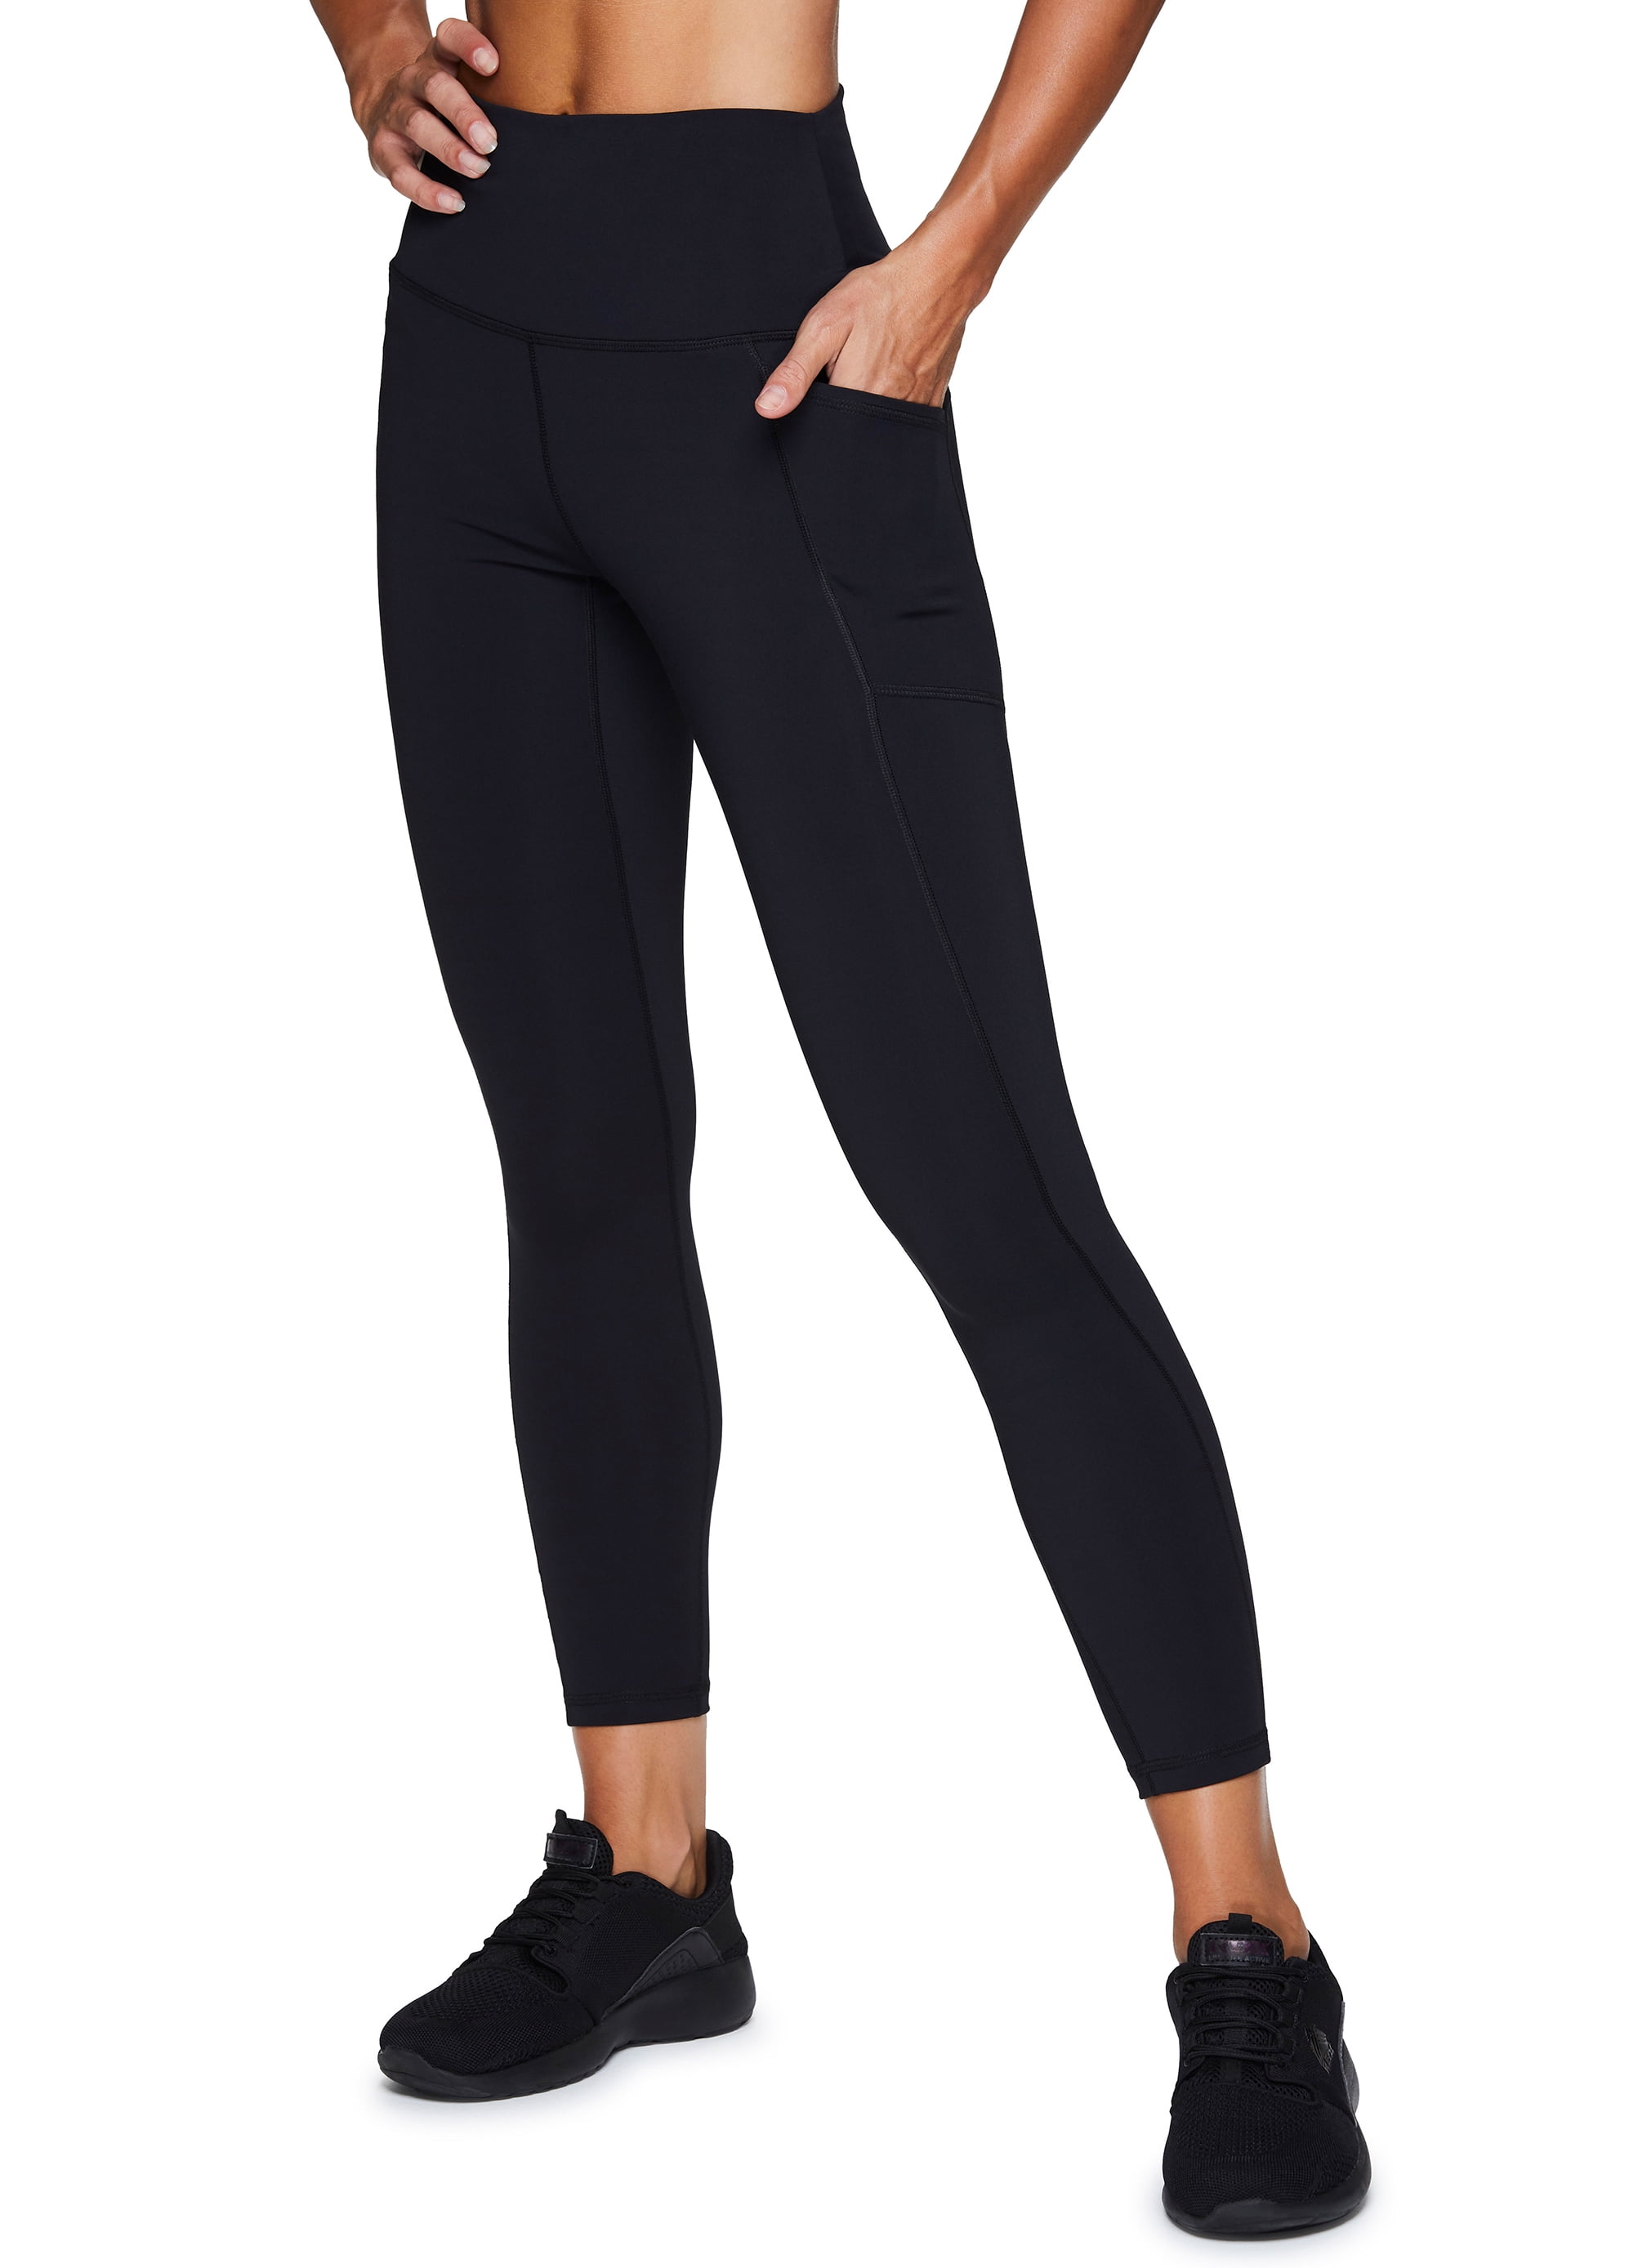 RBX Active Womens Athletic Fashion Workout Yoga Ankle Length 7/8 Legging with Leg Detail 